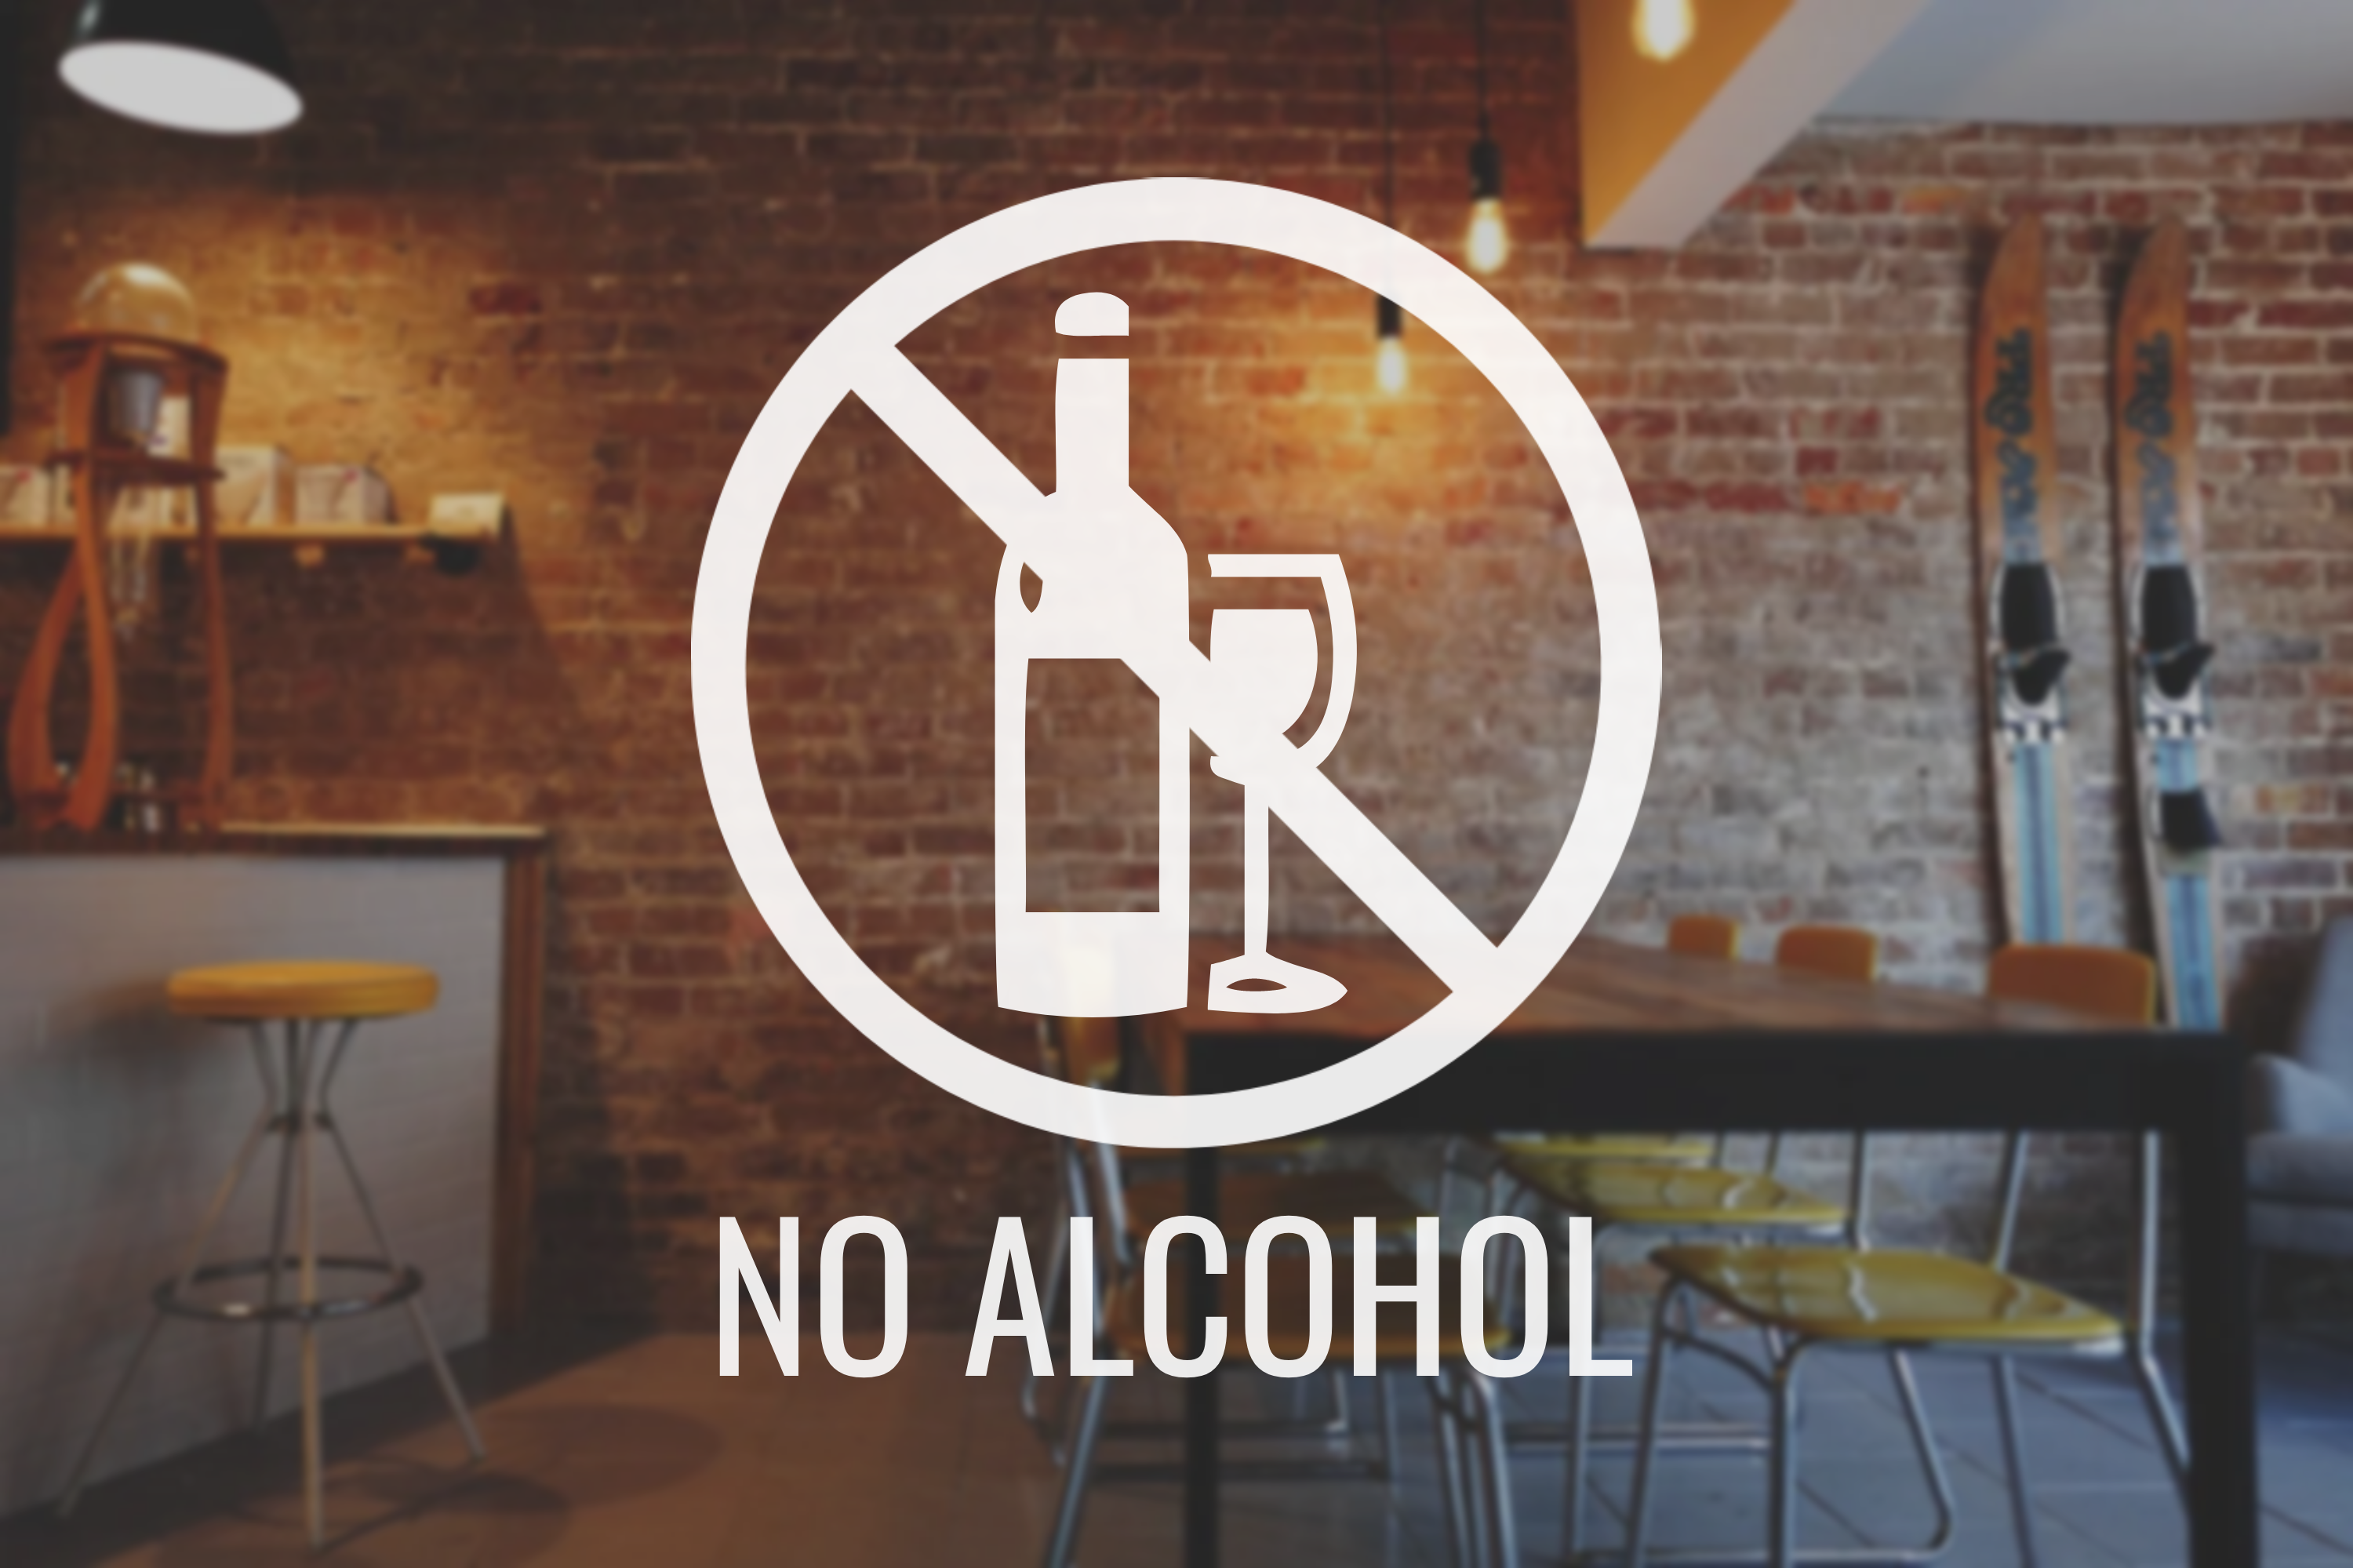 No Alcohol Decal - Vinyl Sticker for Businesses, Stores, Bars, Coffee Shops, Eatery, Cafeteria, Food Truck!